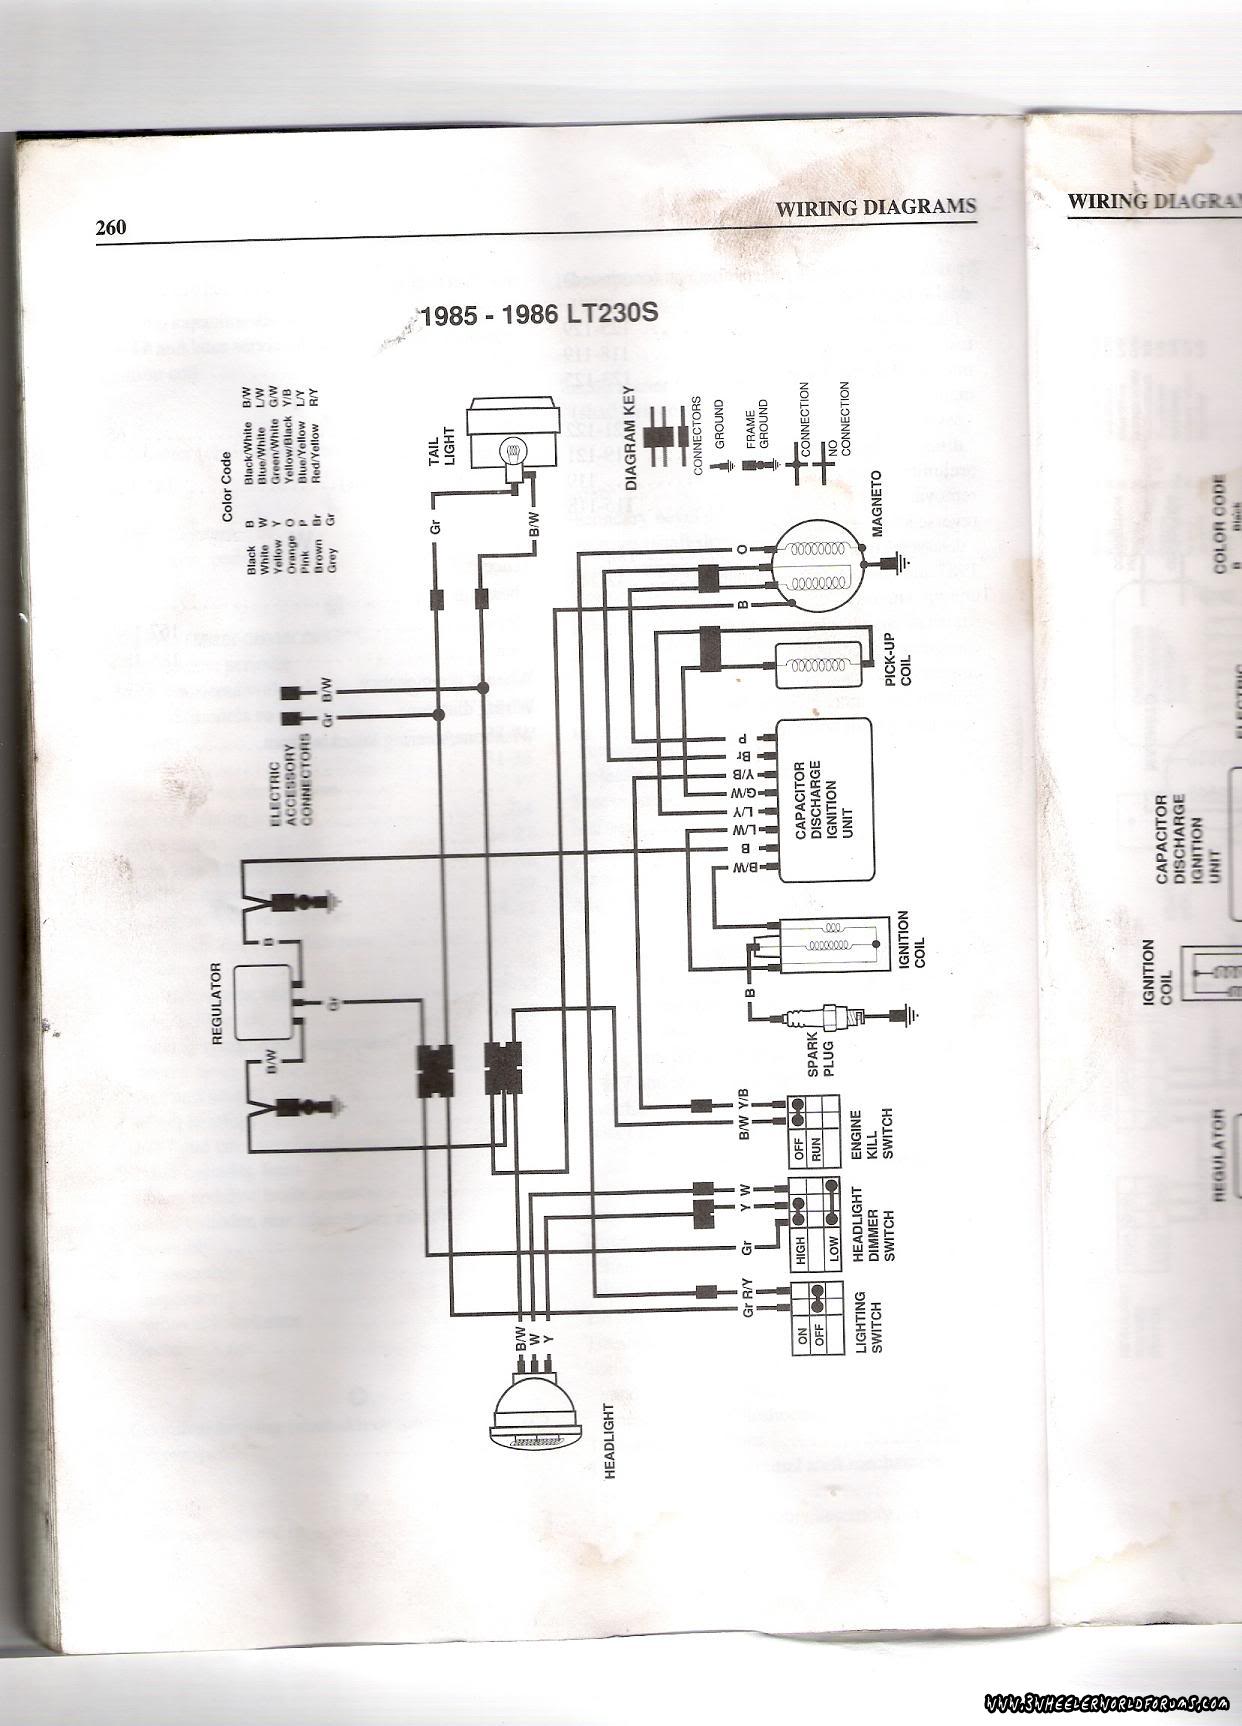 1974 Suzuki Ts185 Wiring Diagram from atvconnection.com